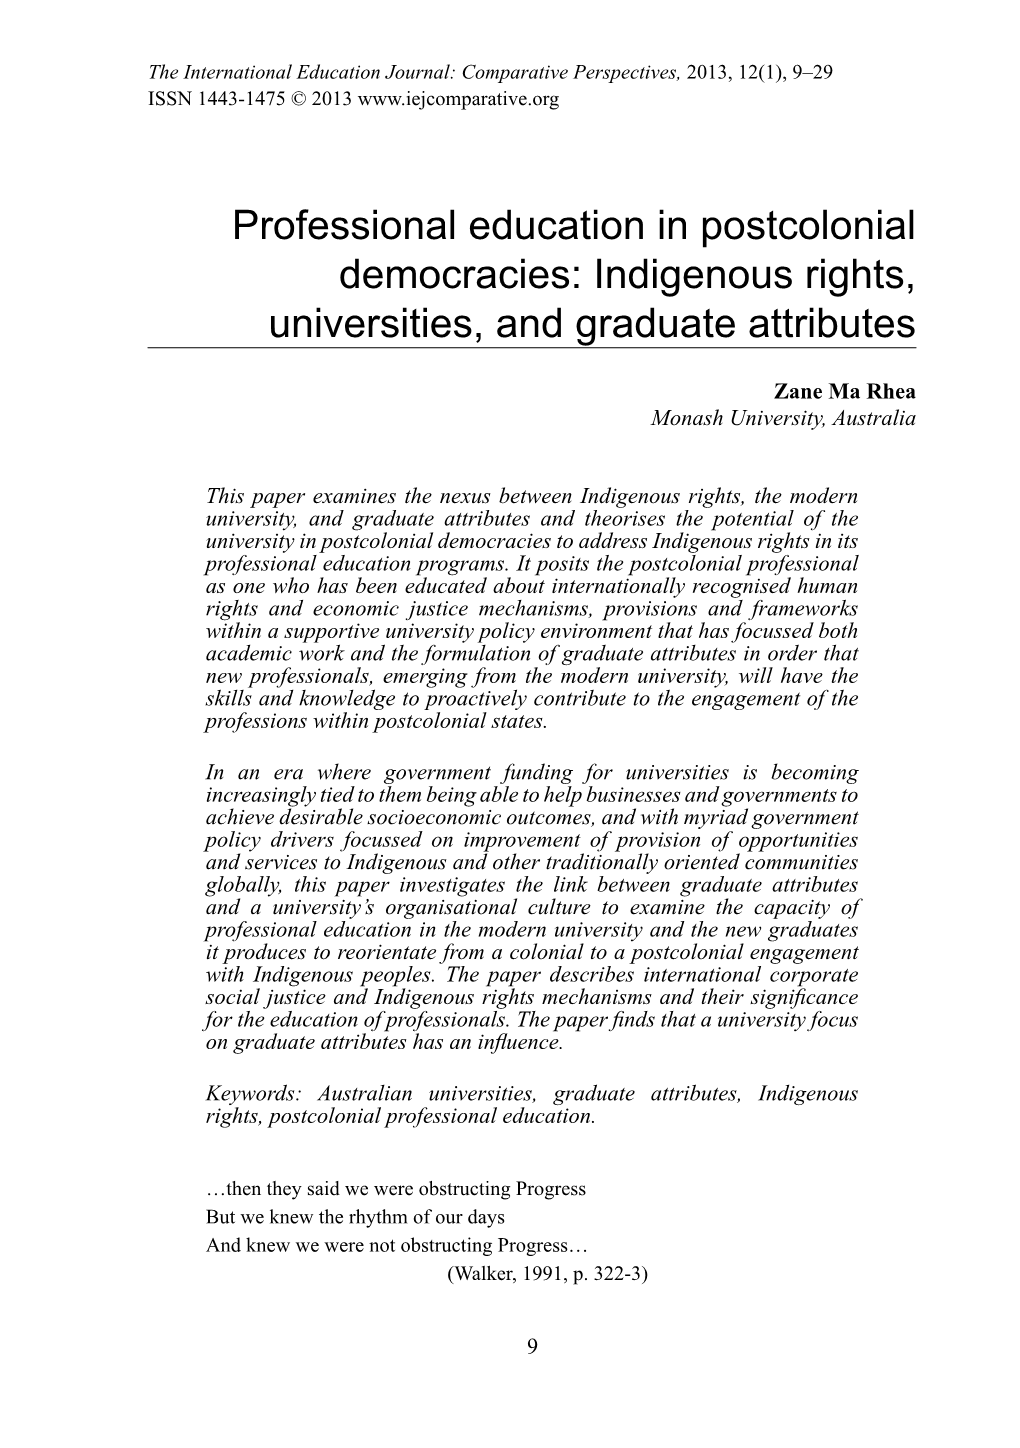 Indigenous Rights, Universities, and Graduate Attributes